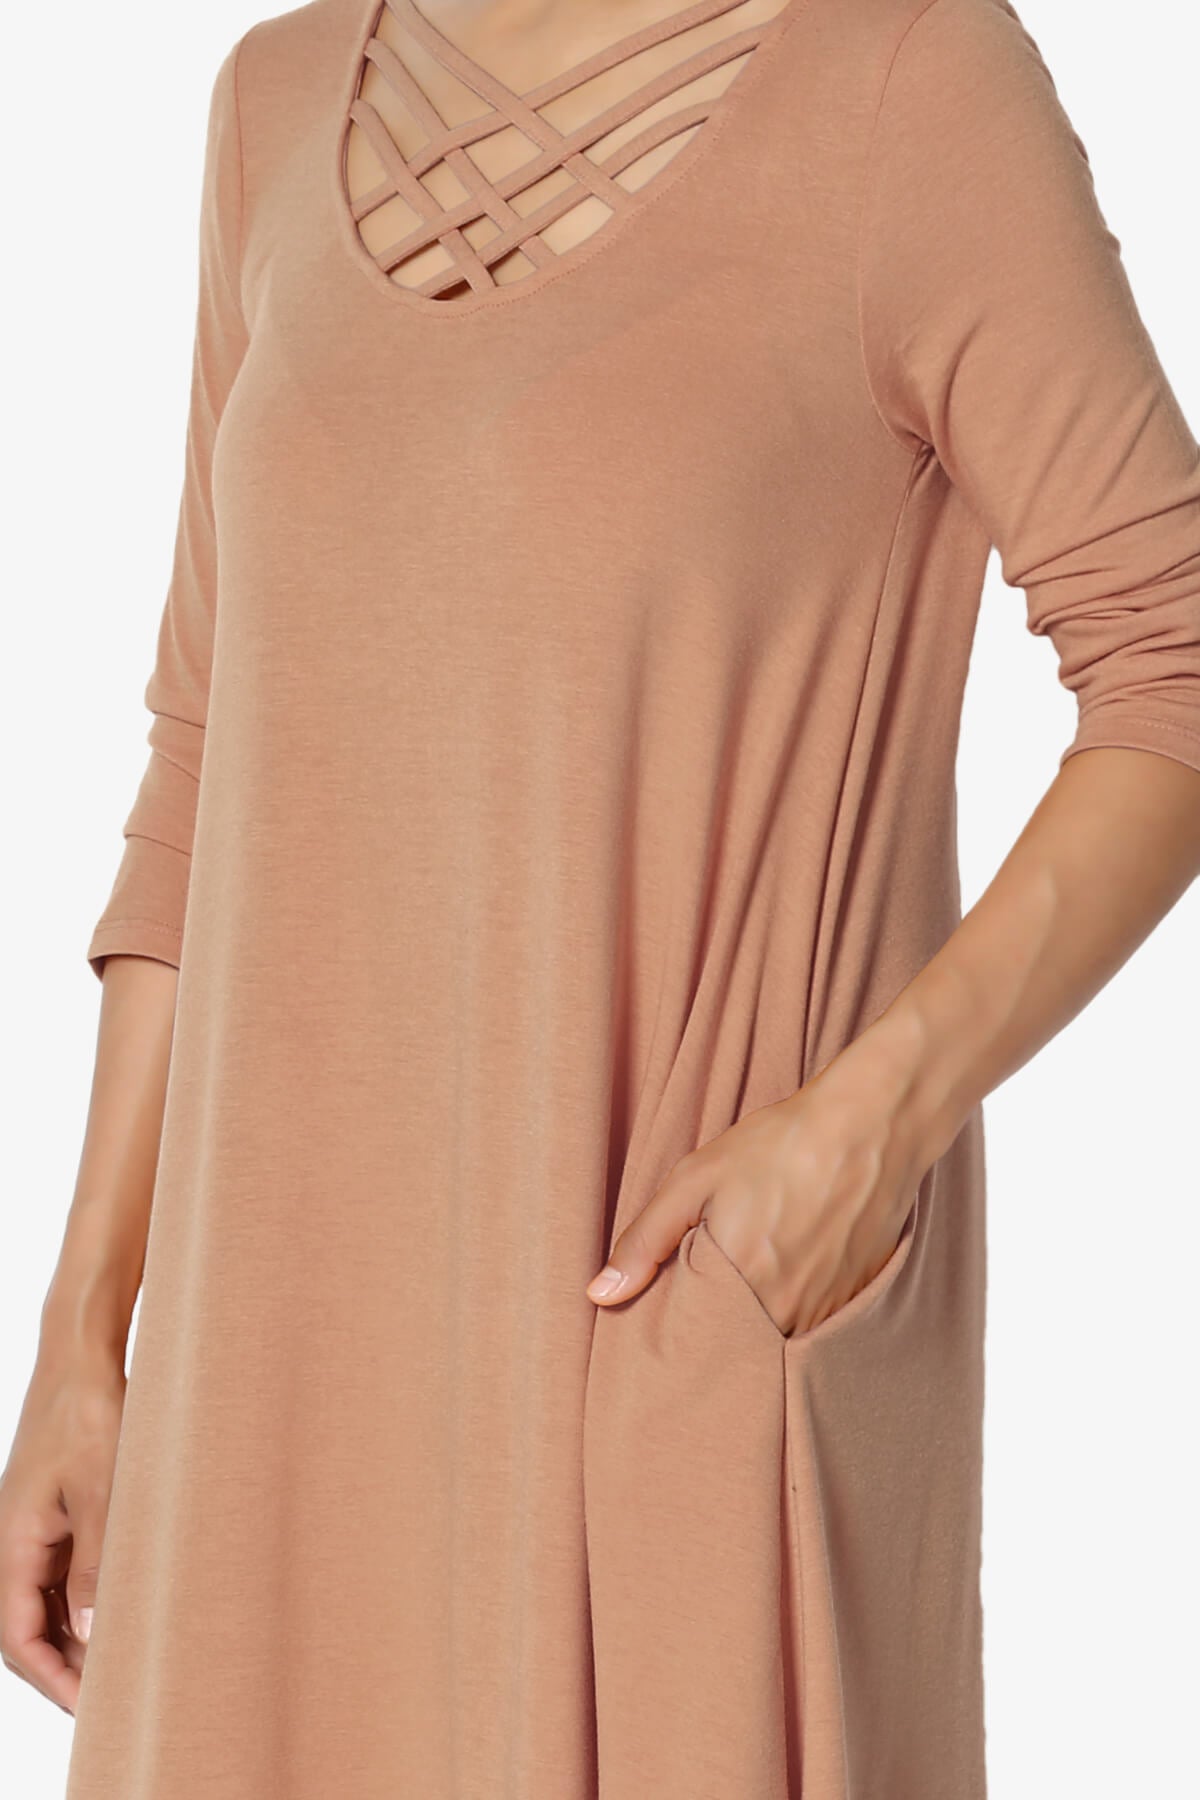 Ariella 3/4 Sleeve Strappy Scoop Neck Dress EGG SHELL_5